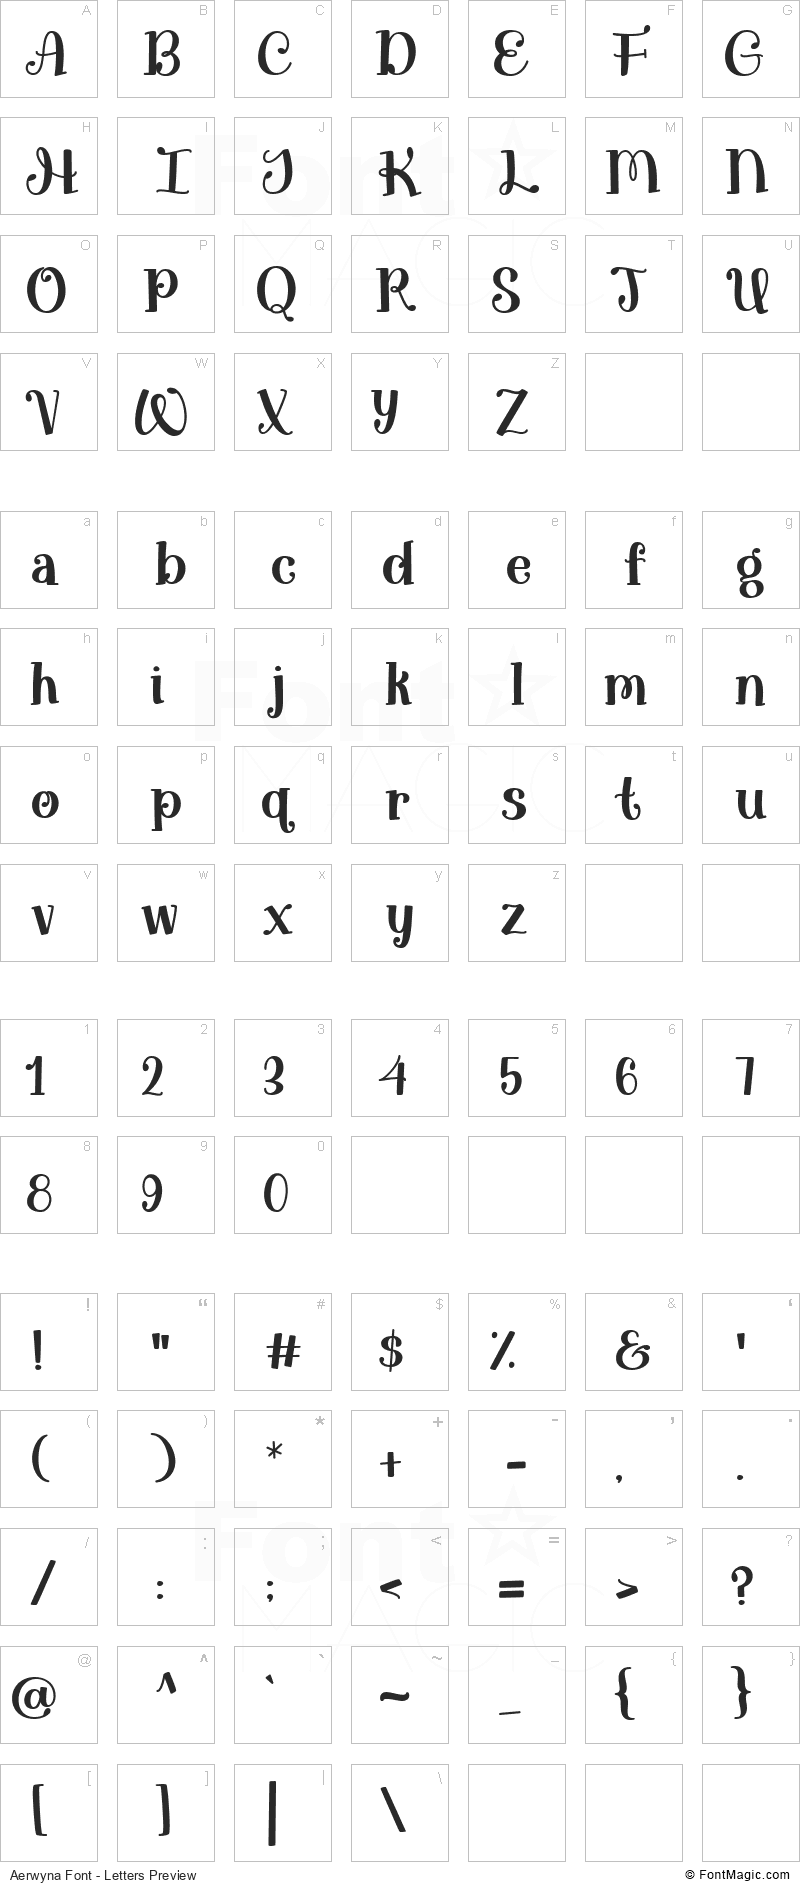 Aerwyna Font - All Latters Preview Chart